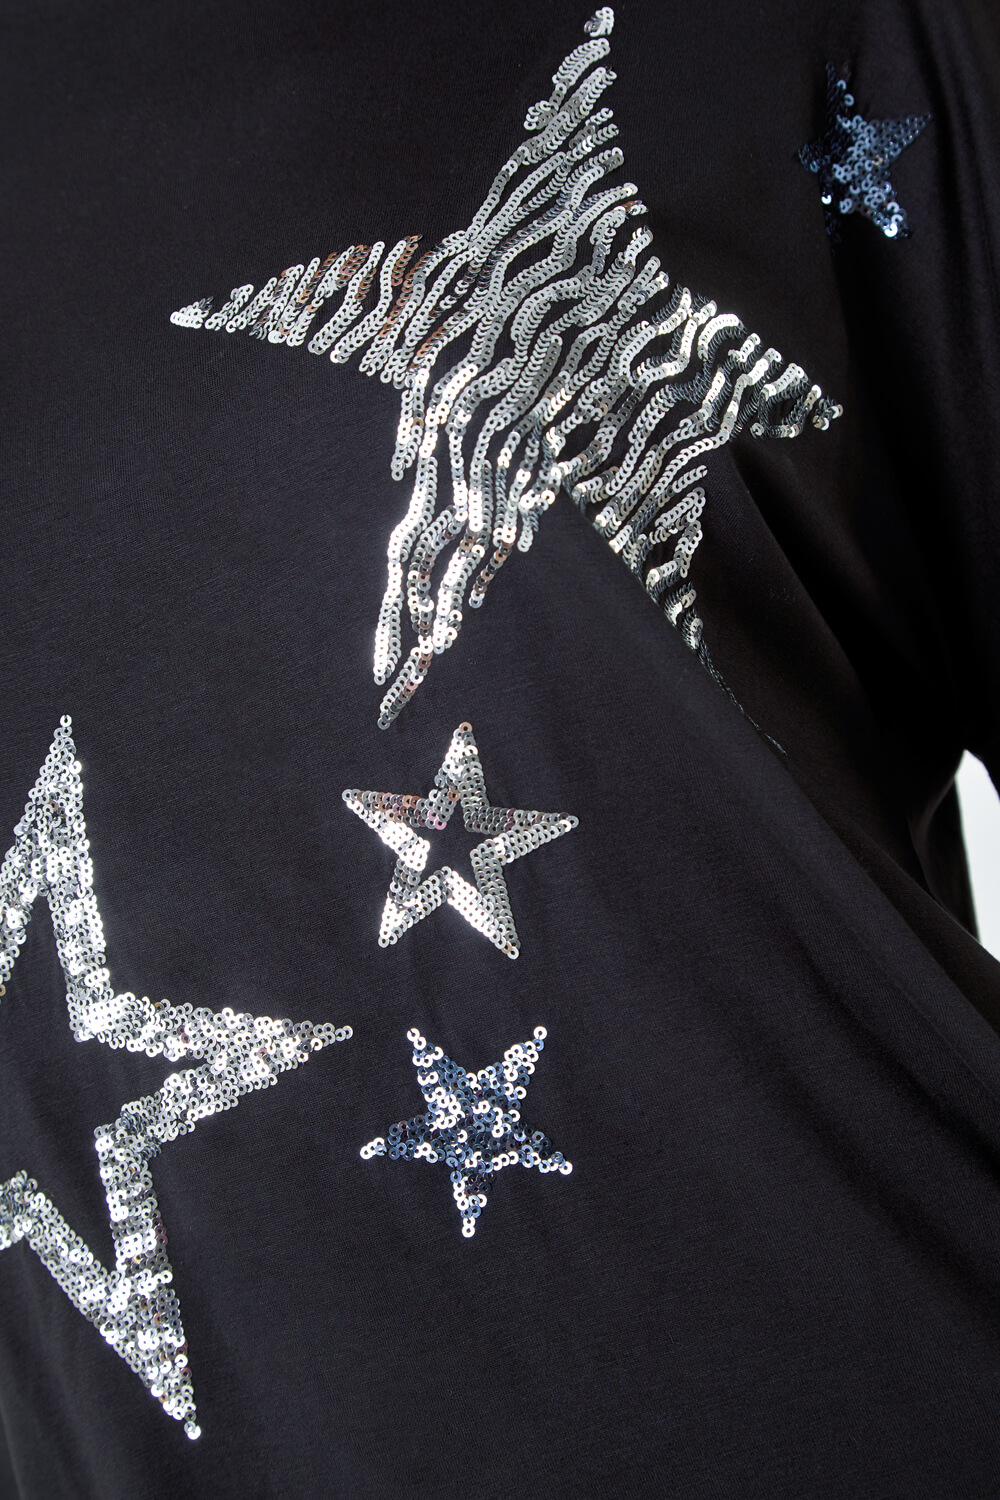 Silver Sequin Star Print Tunic Stretch Top , Image 5 of 5